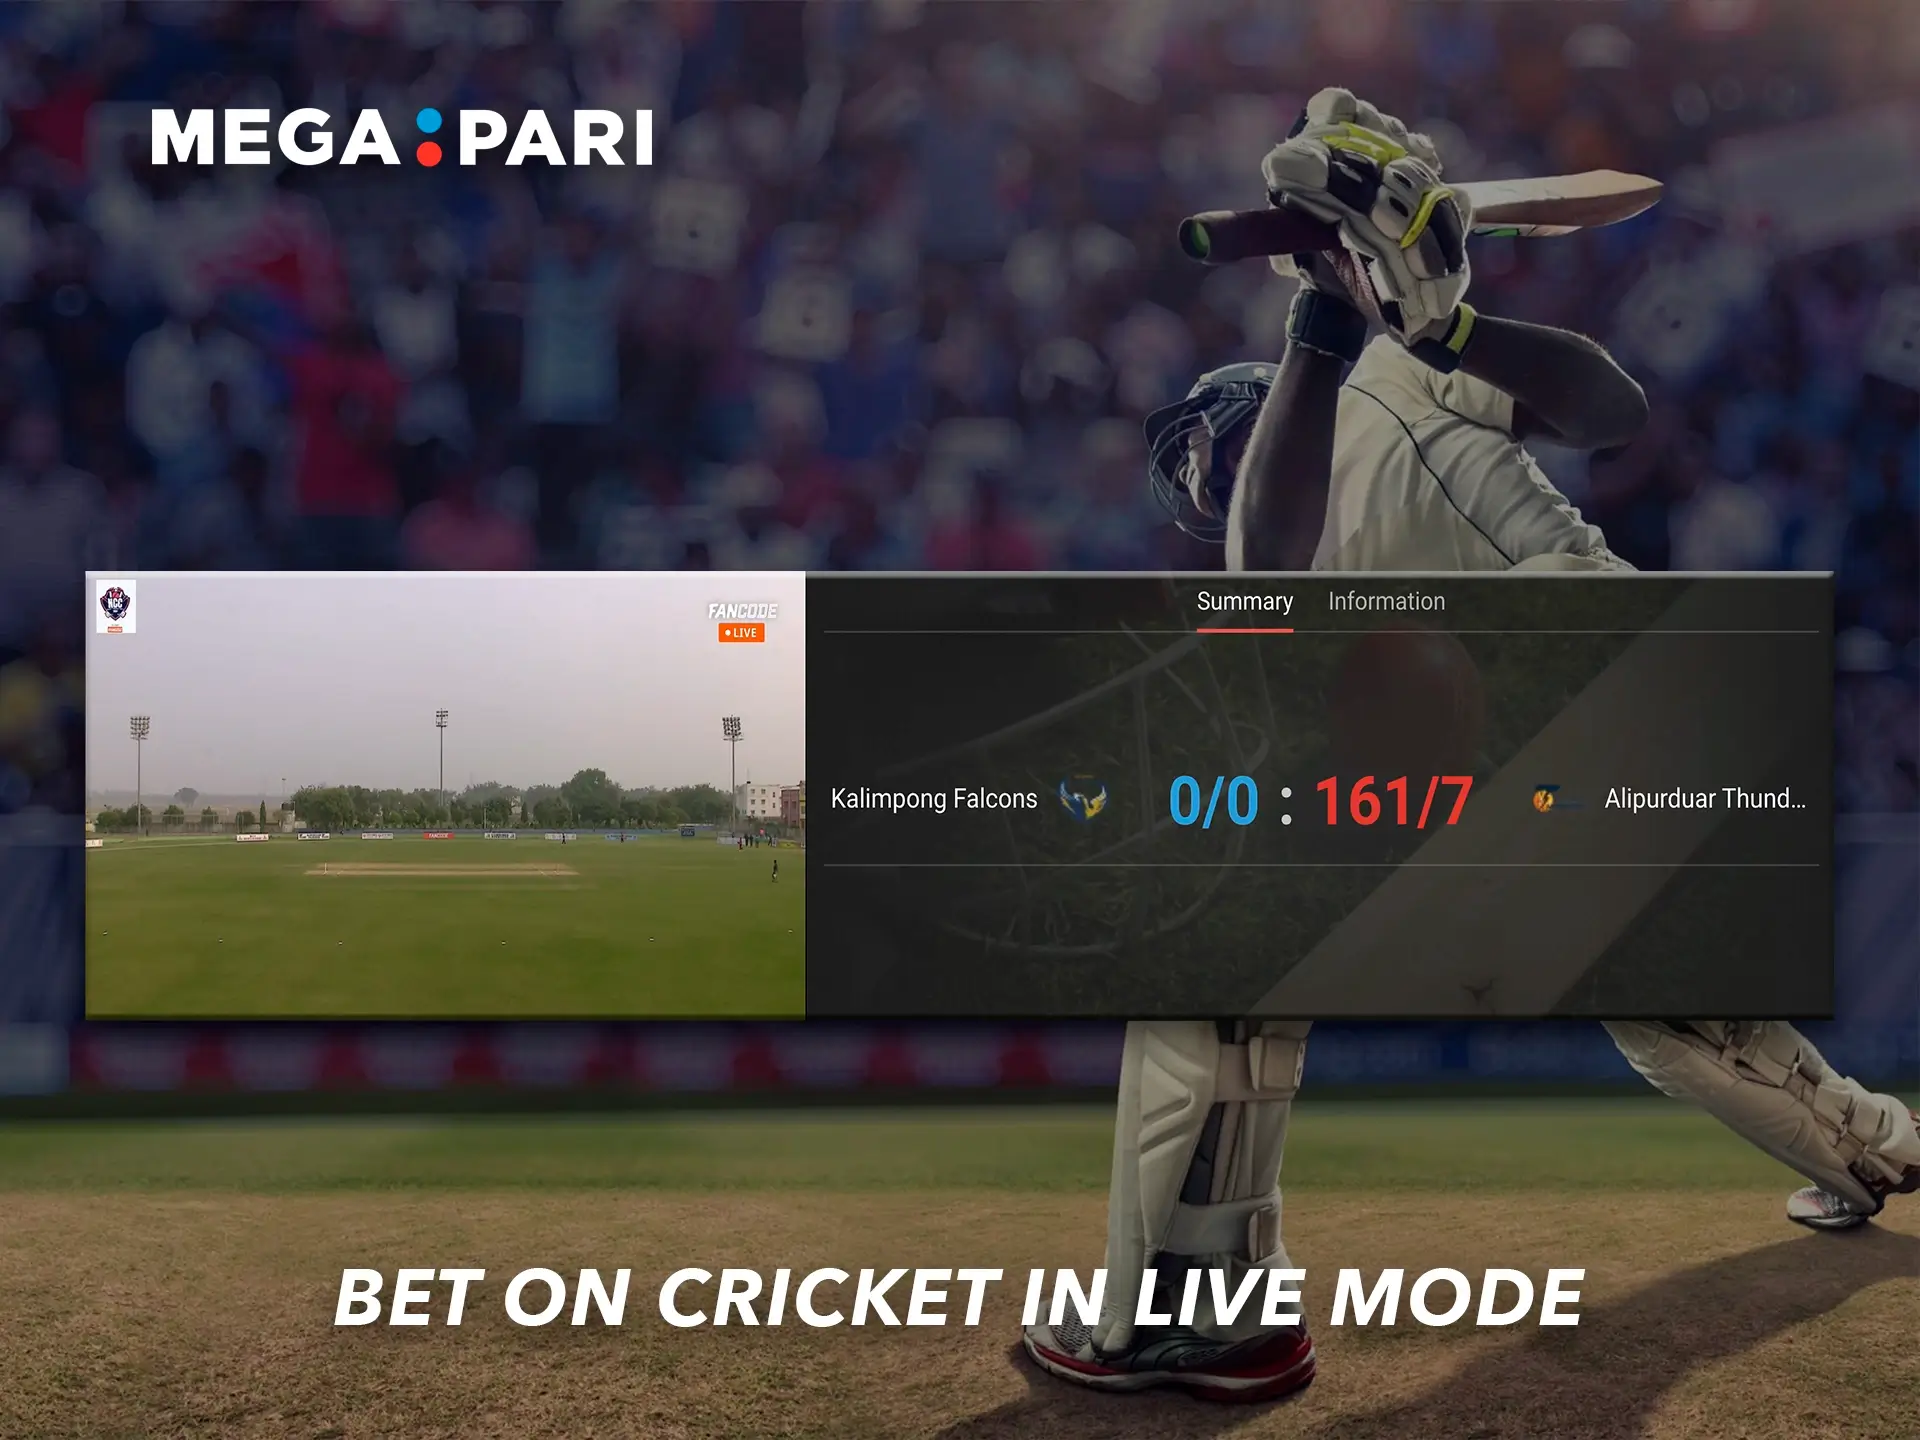 Megapari enables users to enjoy live and high quality cricket without any delays.